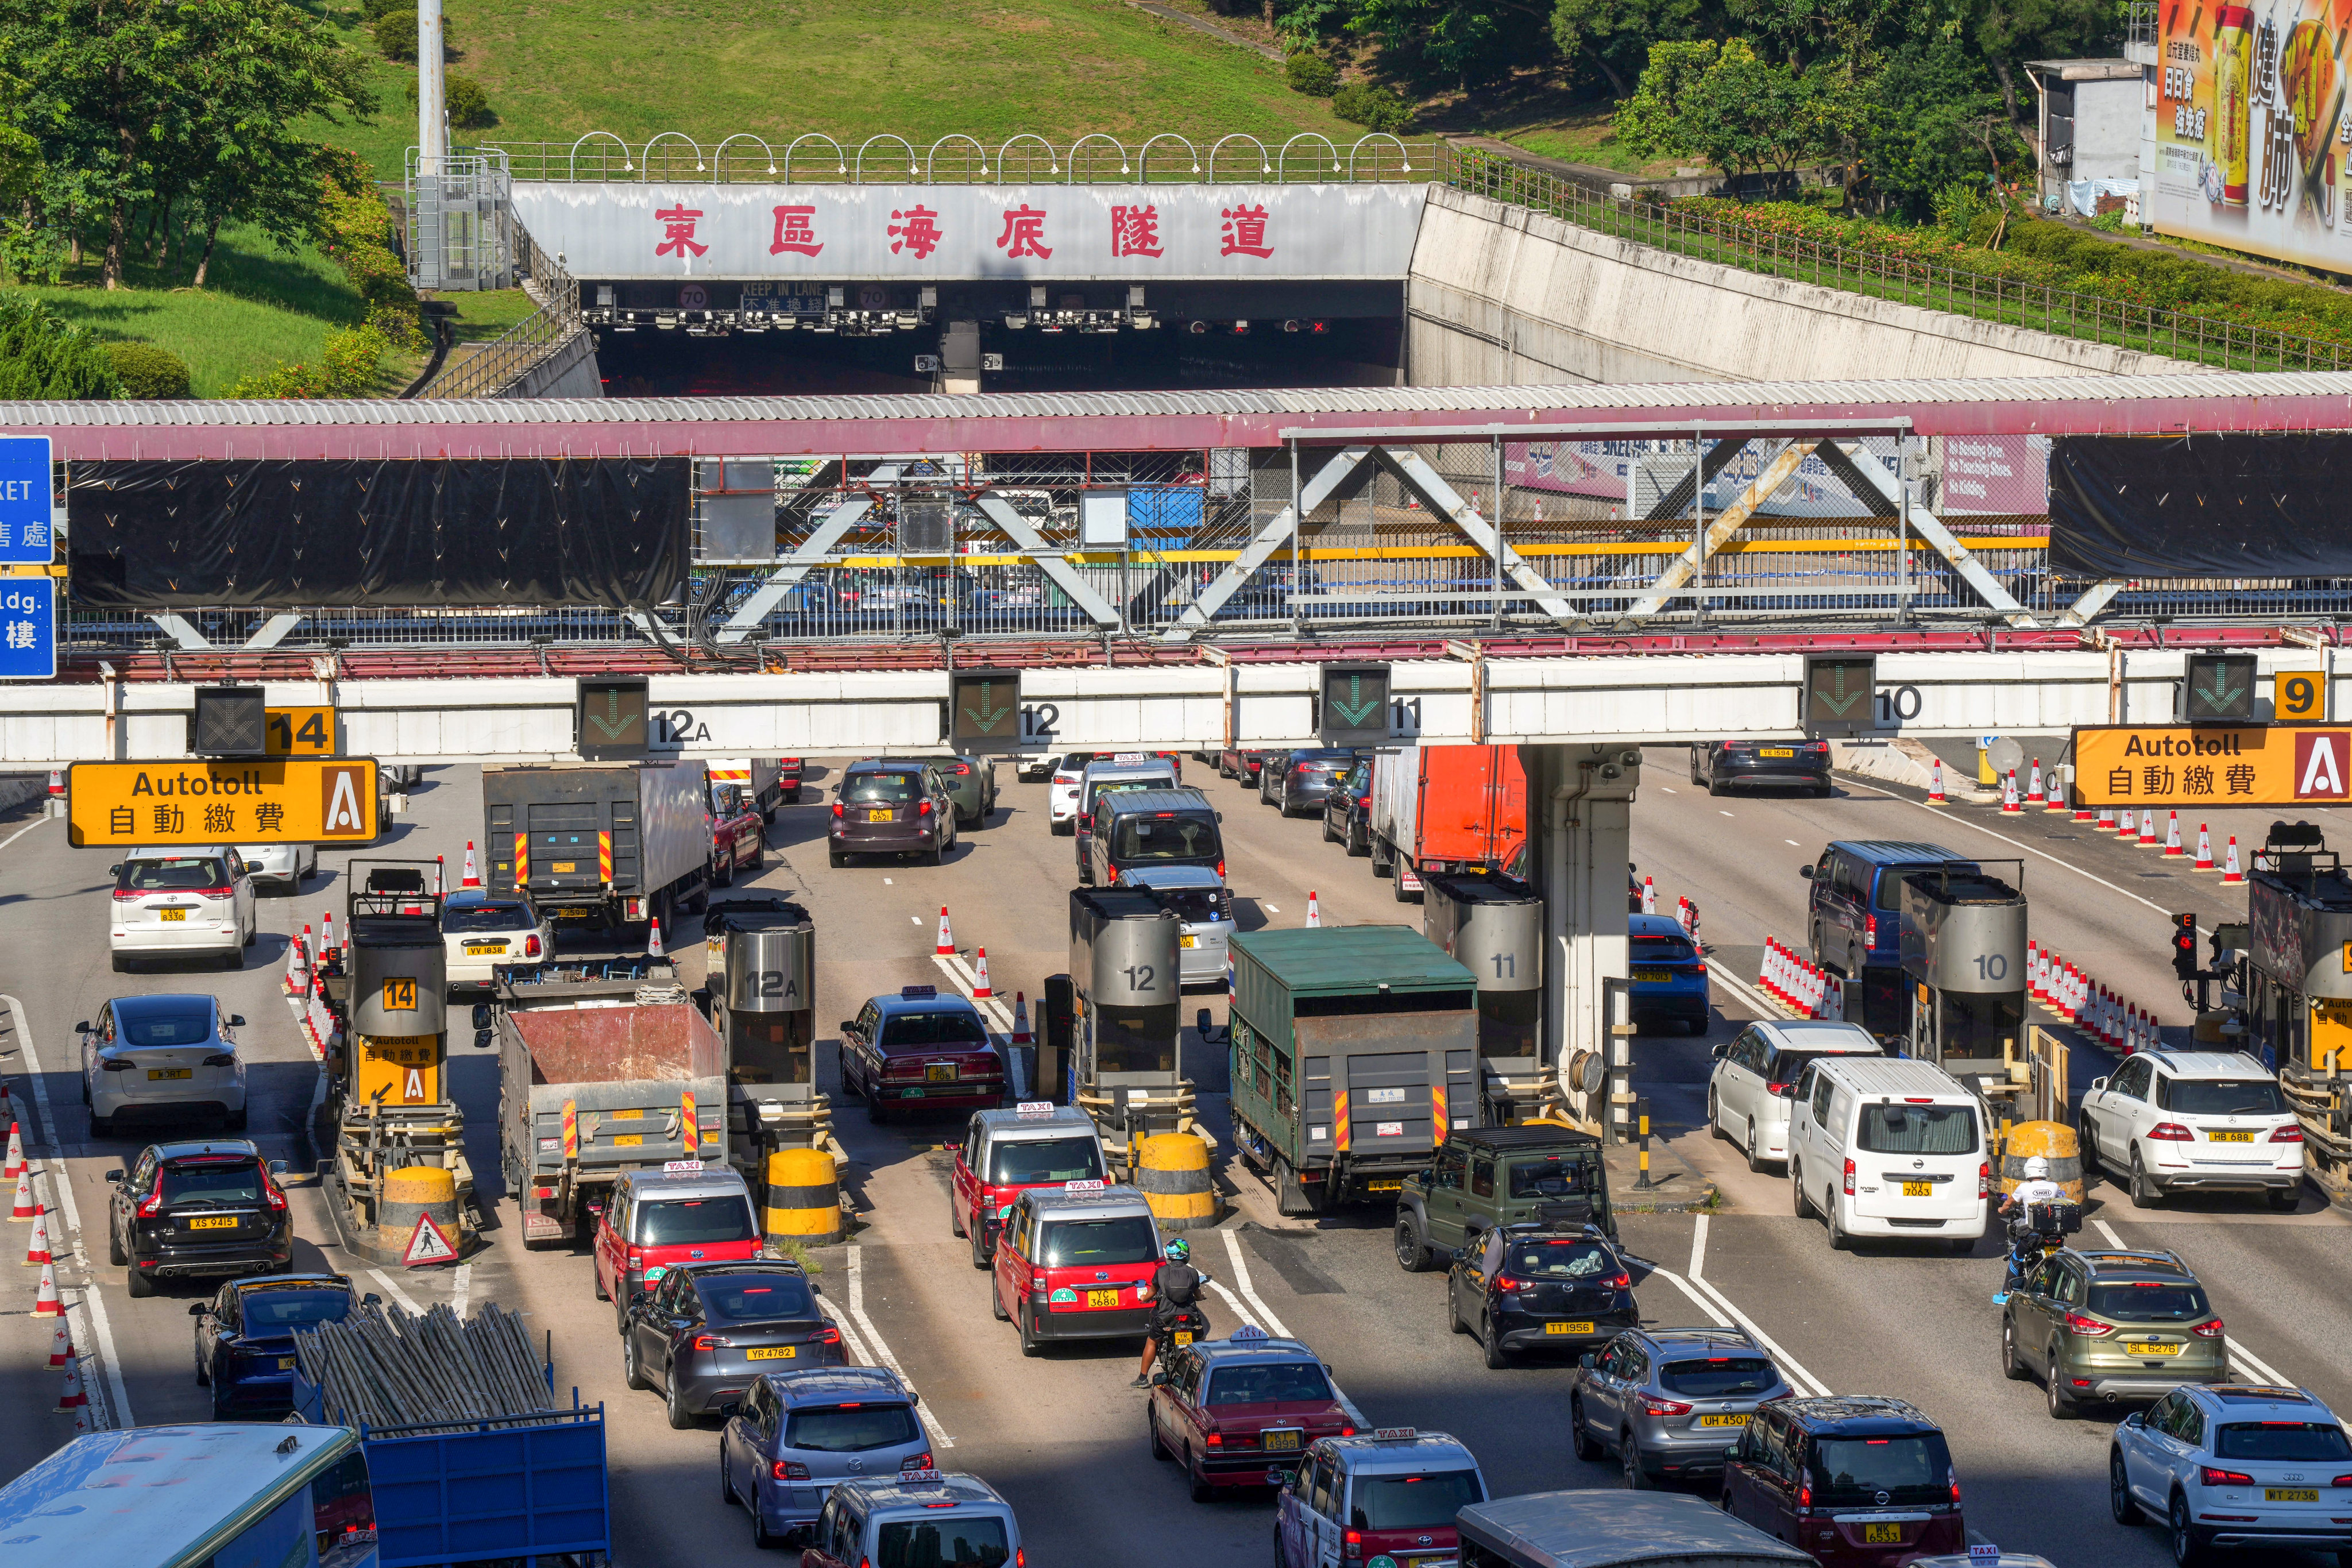 More staff will be on hand at the Eastern Harbour Tunnel before the closure to assist and ensure traffic flowed smoothly. Photo: Elson Li